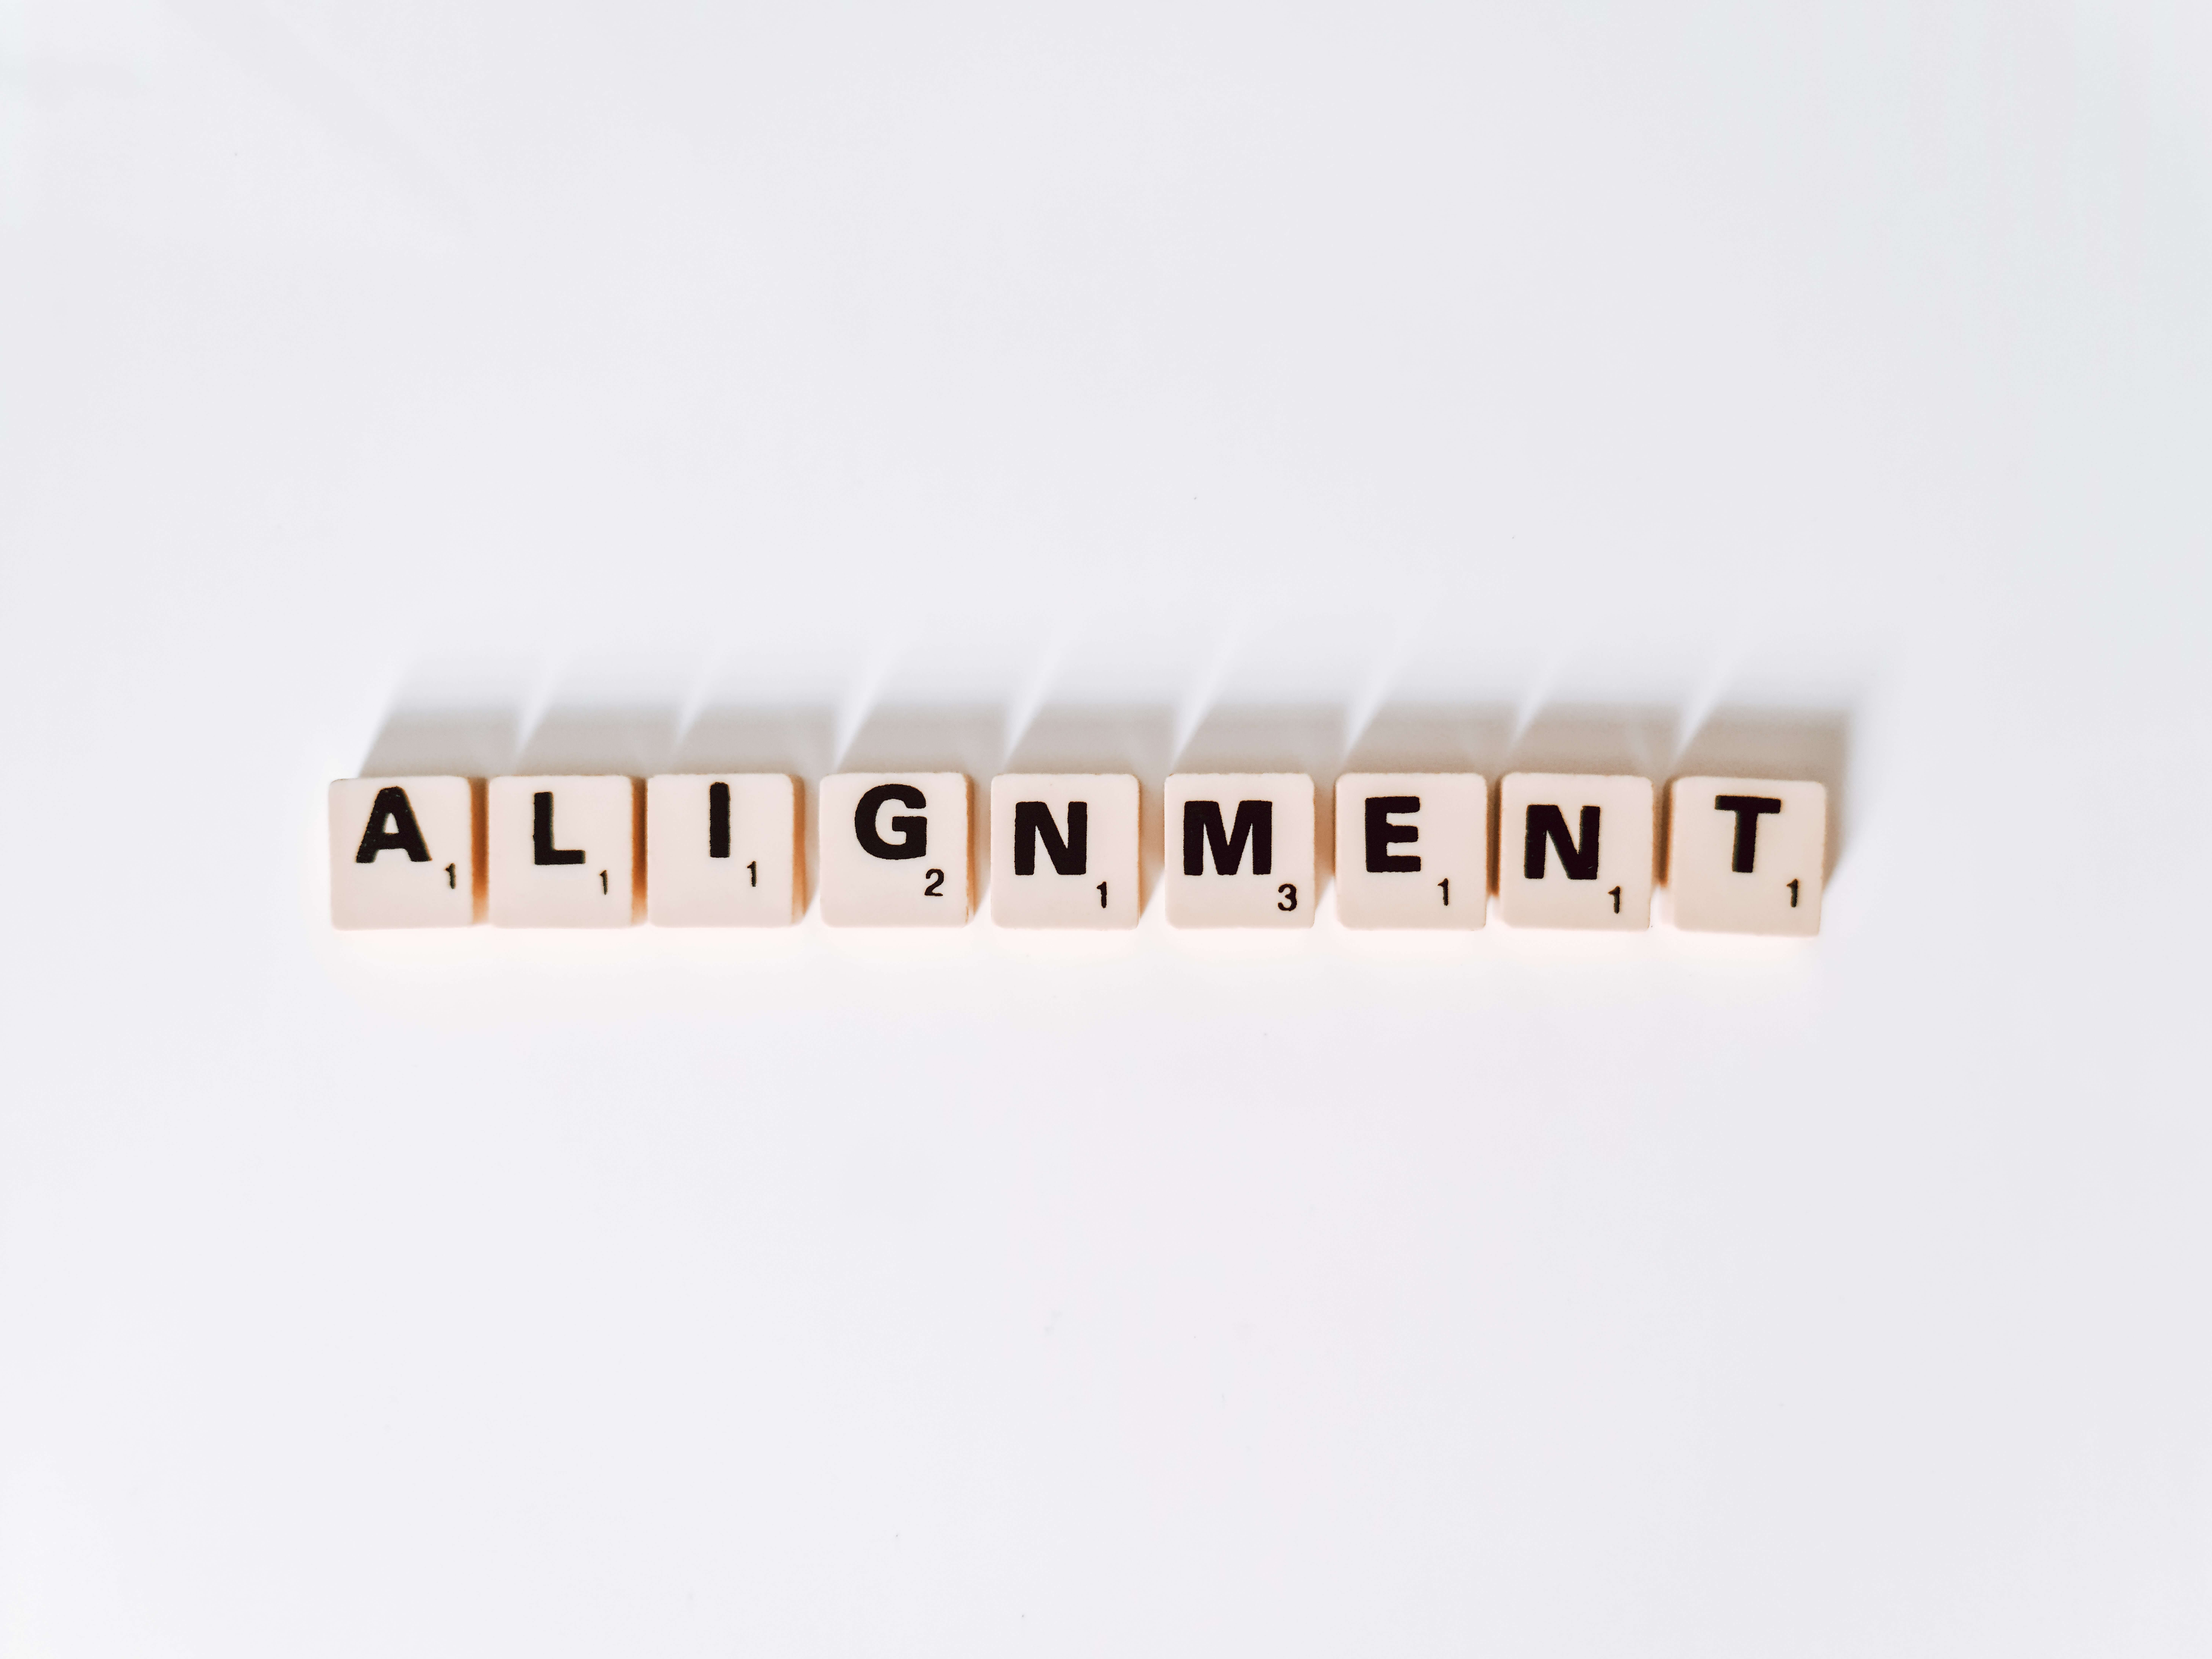 Alignment - The key to Communicating Cross Functionally